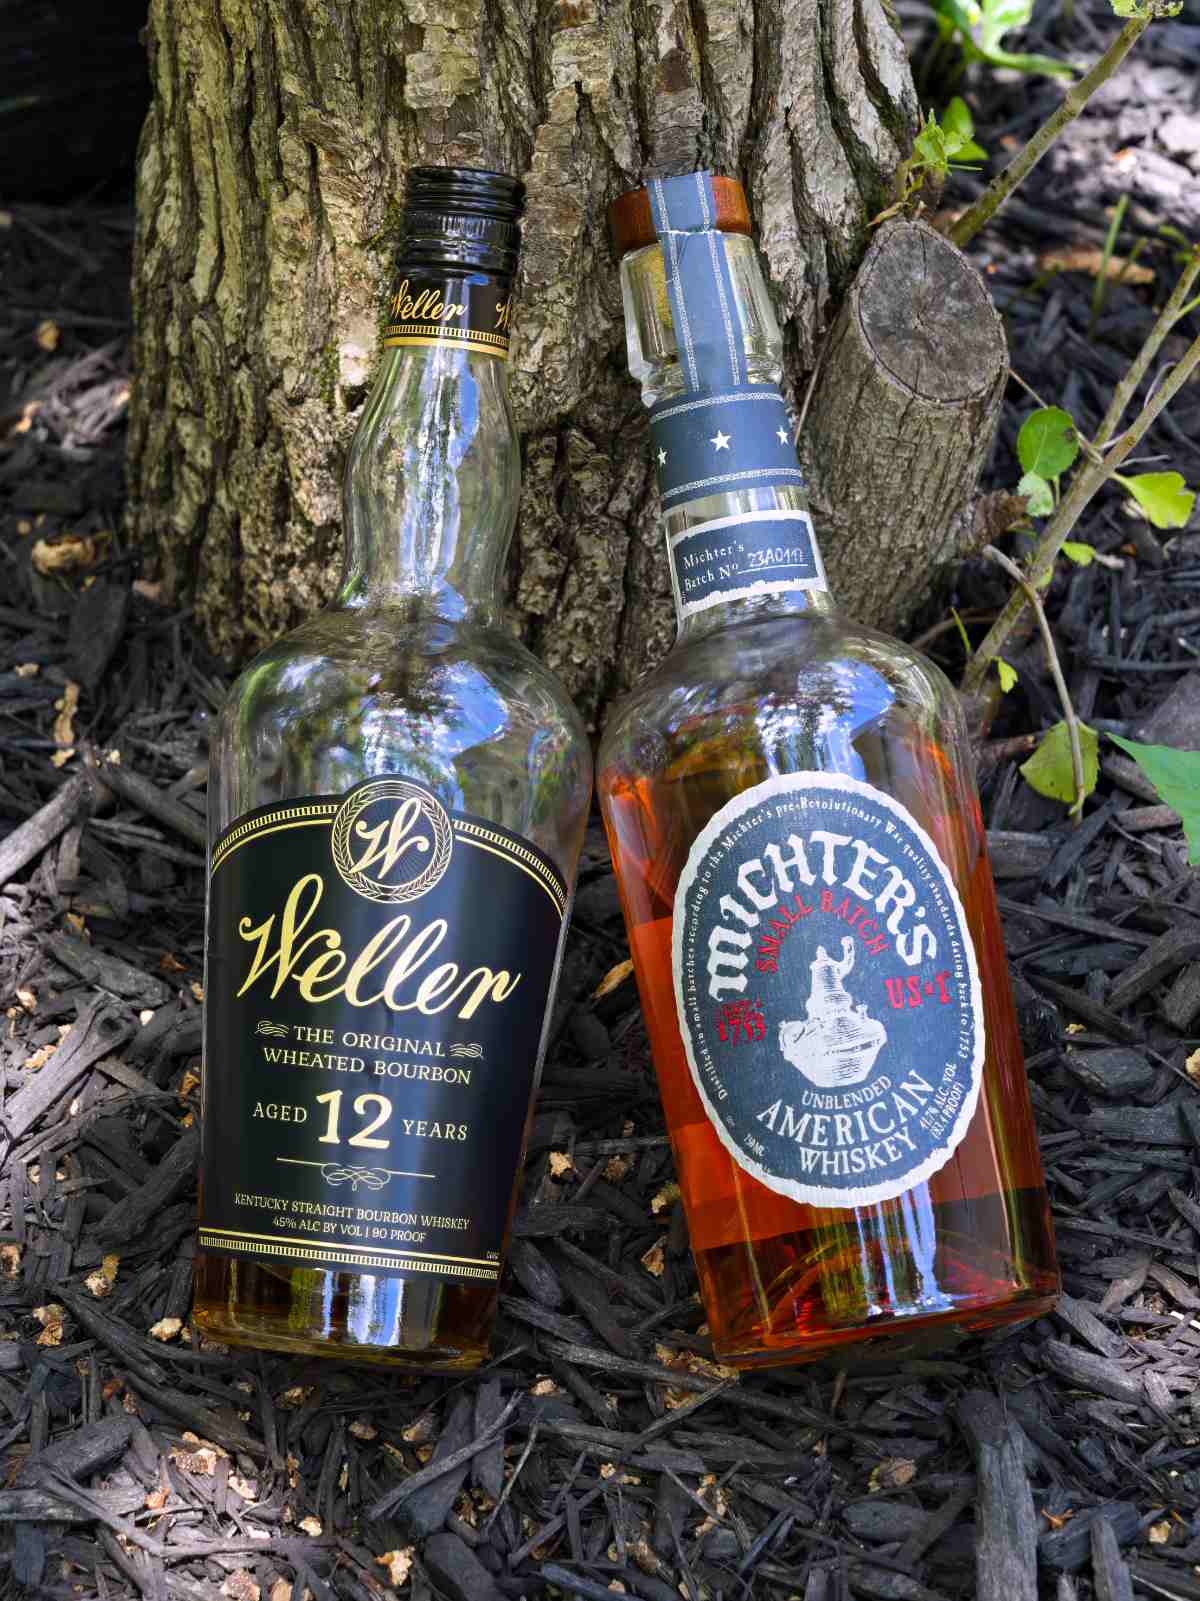 weller 12 vs michter’s ameircan whiskey featured